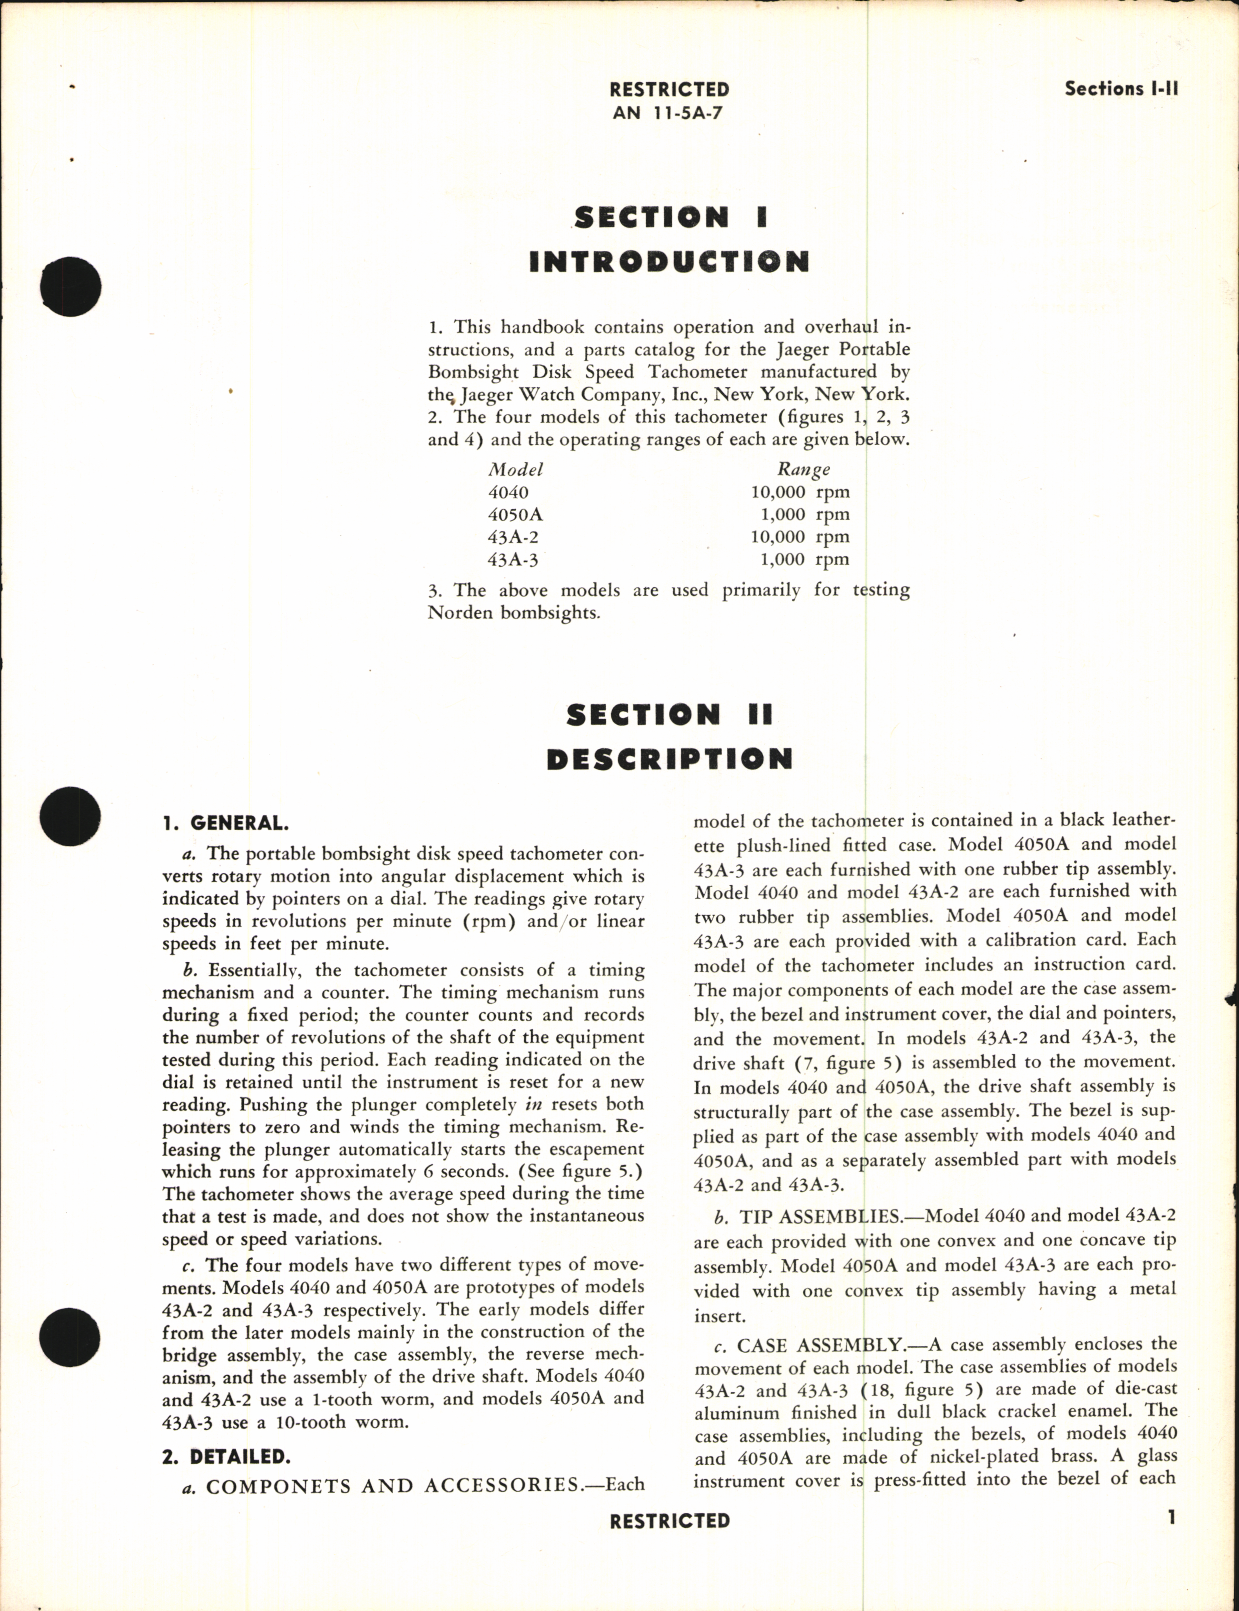 Sample page 5 from AirCorps Library document: Operation, Service, & Overhaul Instructions with Parts Catalog for Portable Bombsight Disk Speed Tachometer